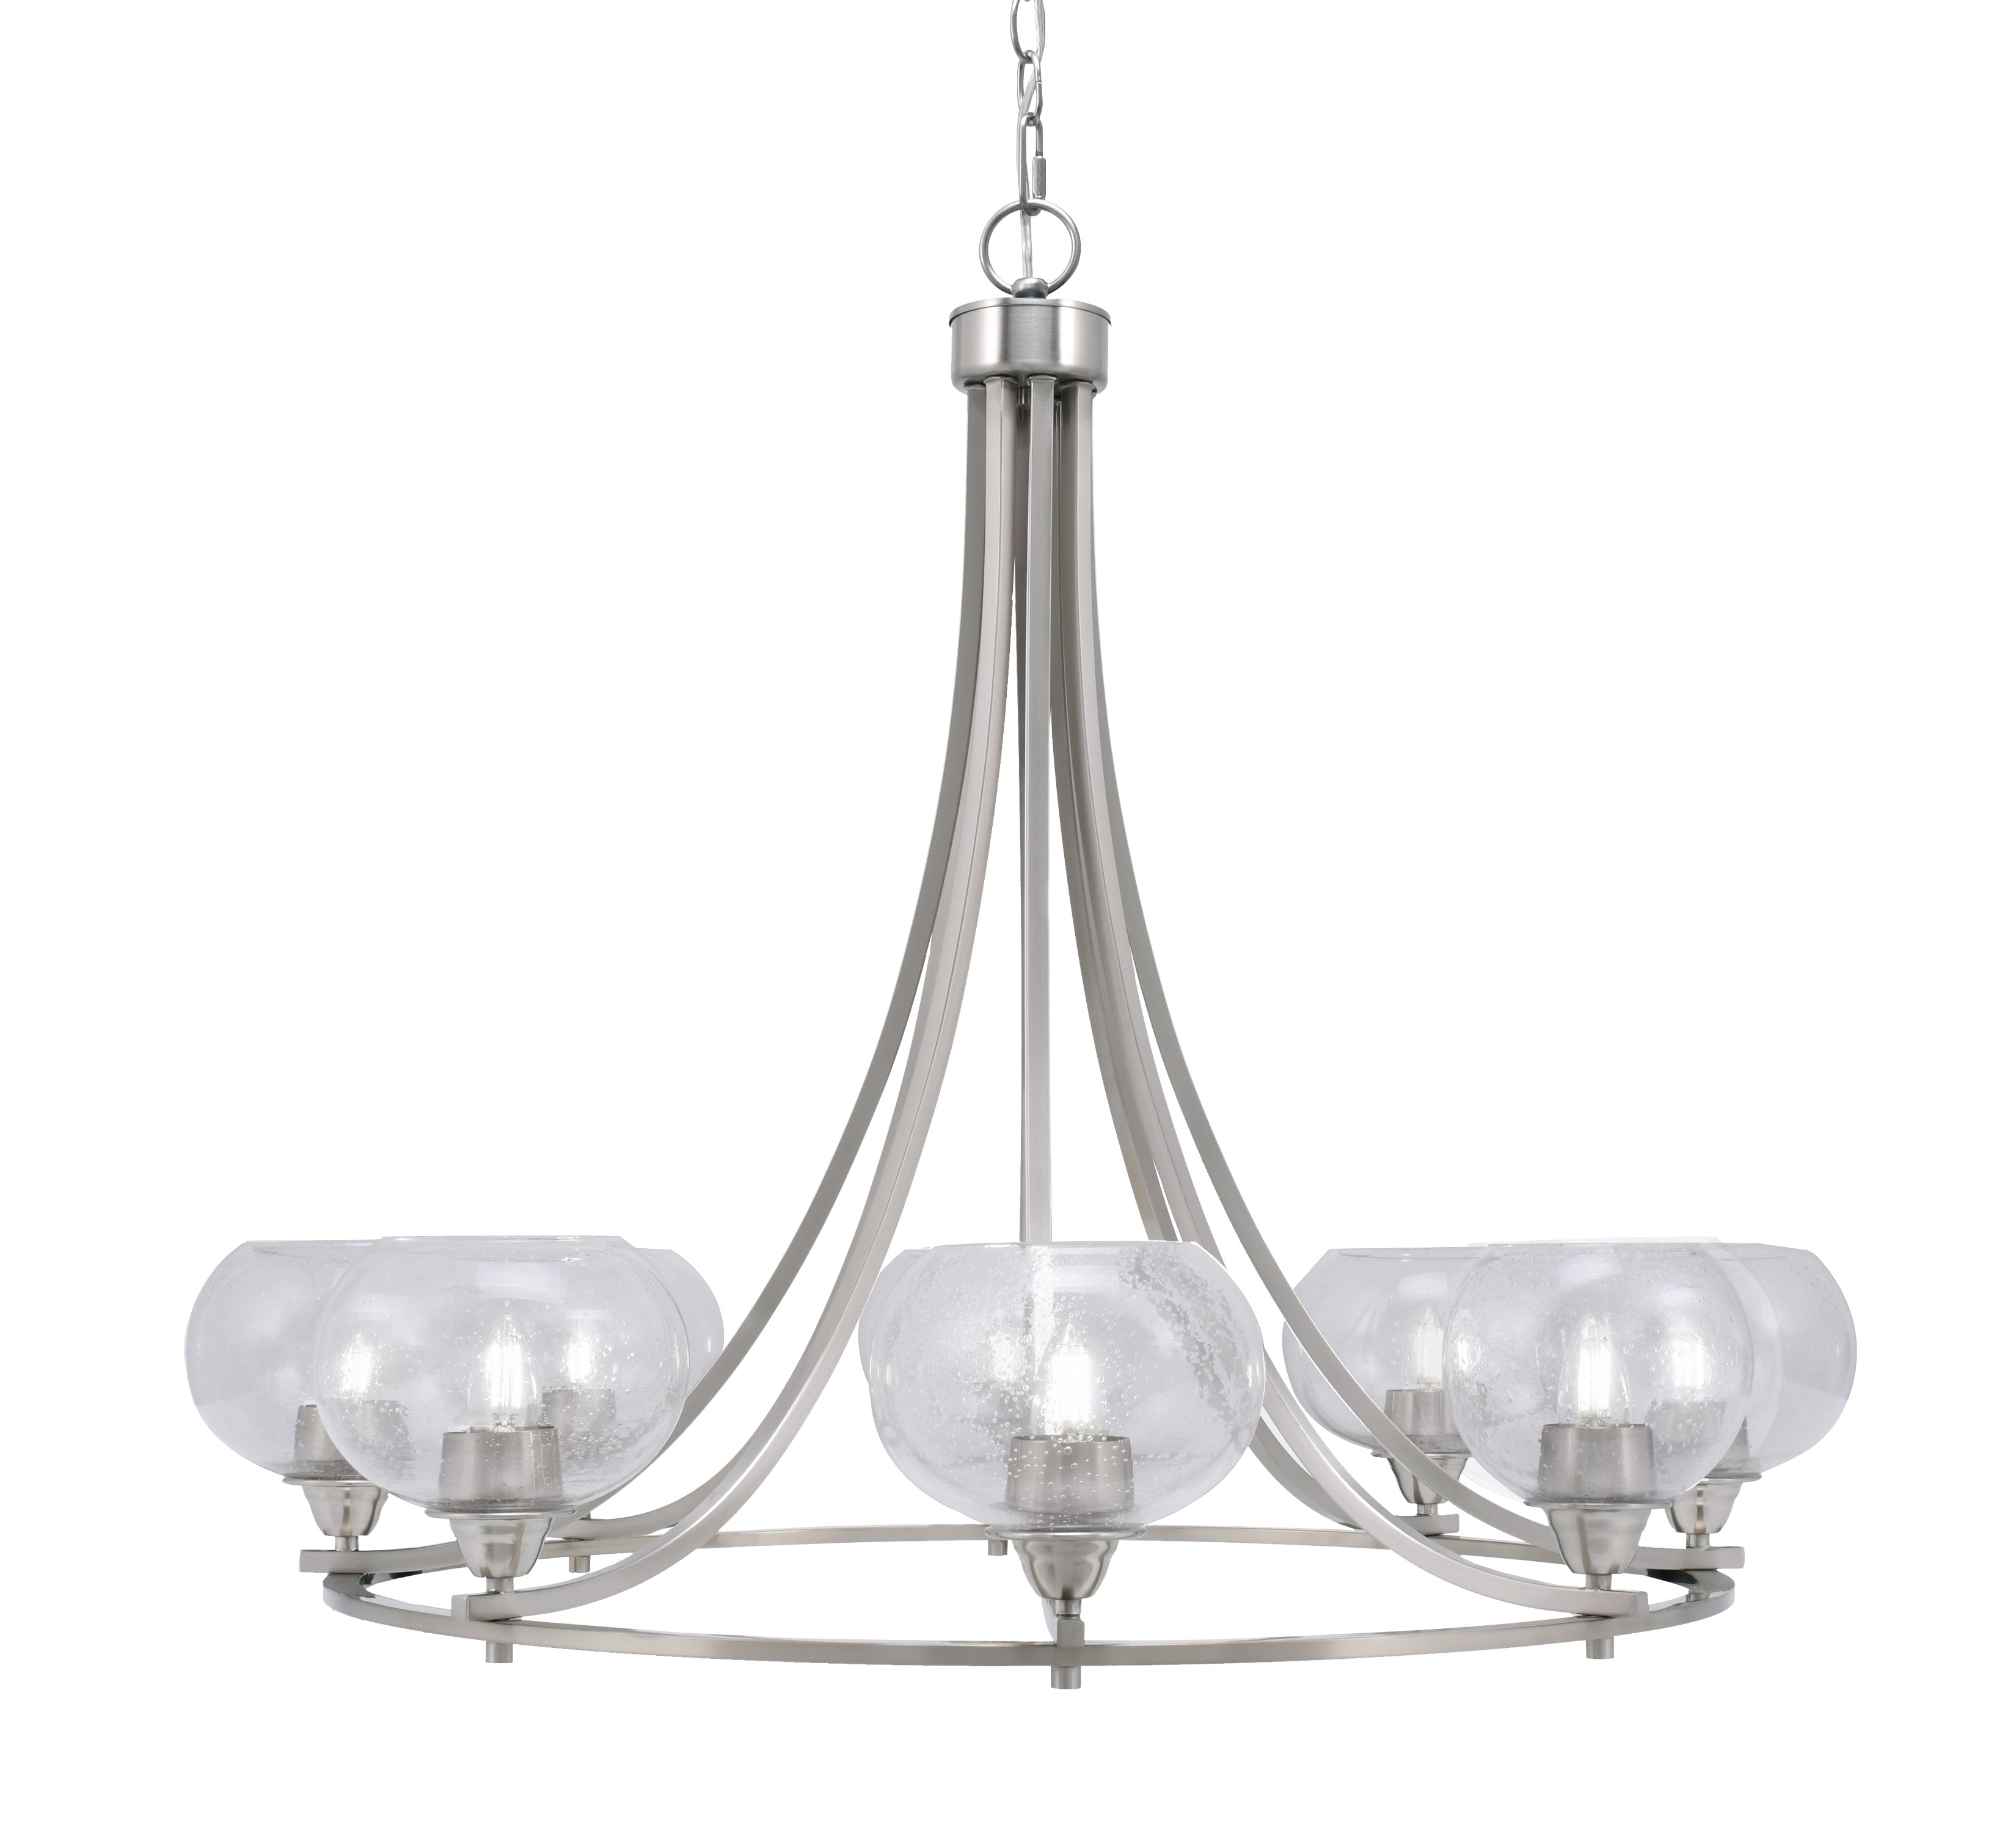 Toltec Lighting 3408-BN-202 Paramount Uplight, 8 Light, Chandelier In Brushed Nickel Finish With 7" Clear Bubble Glass